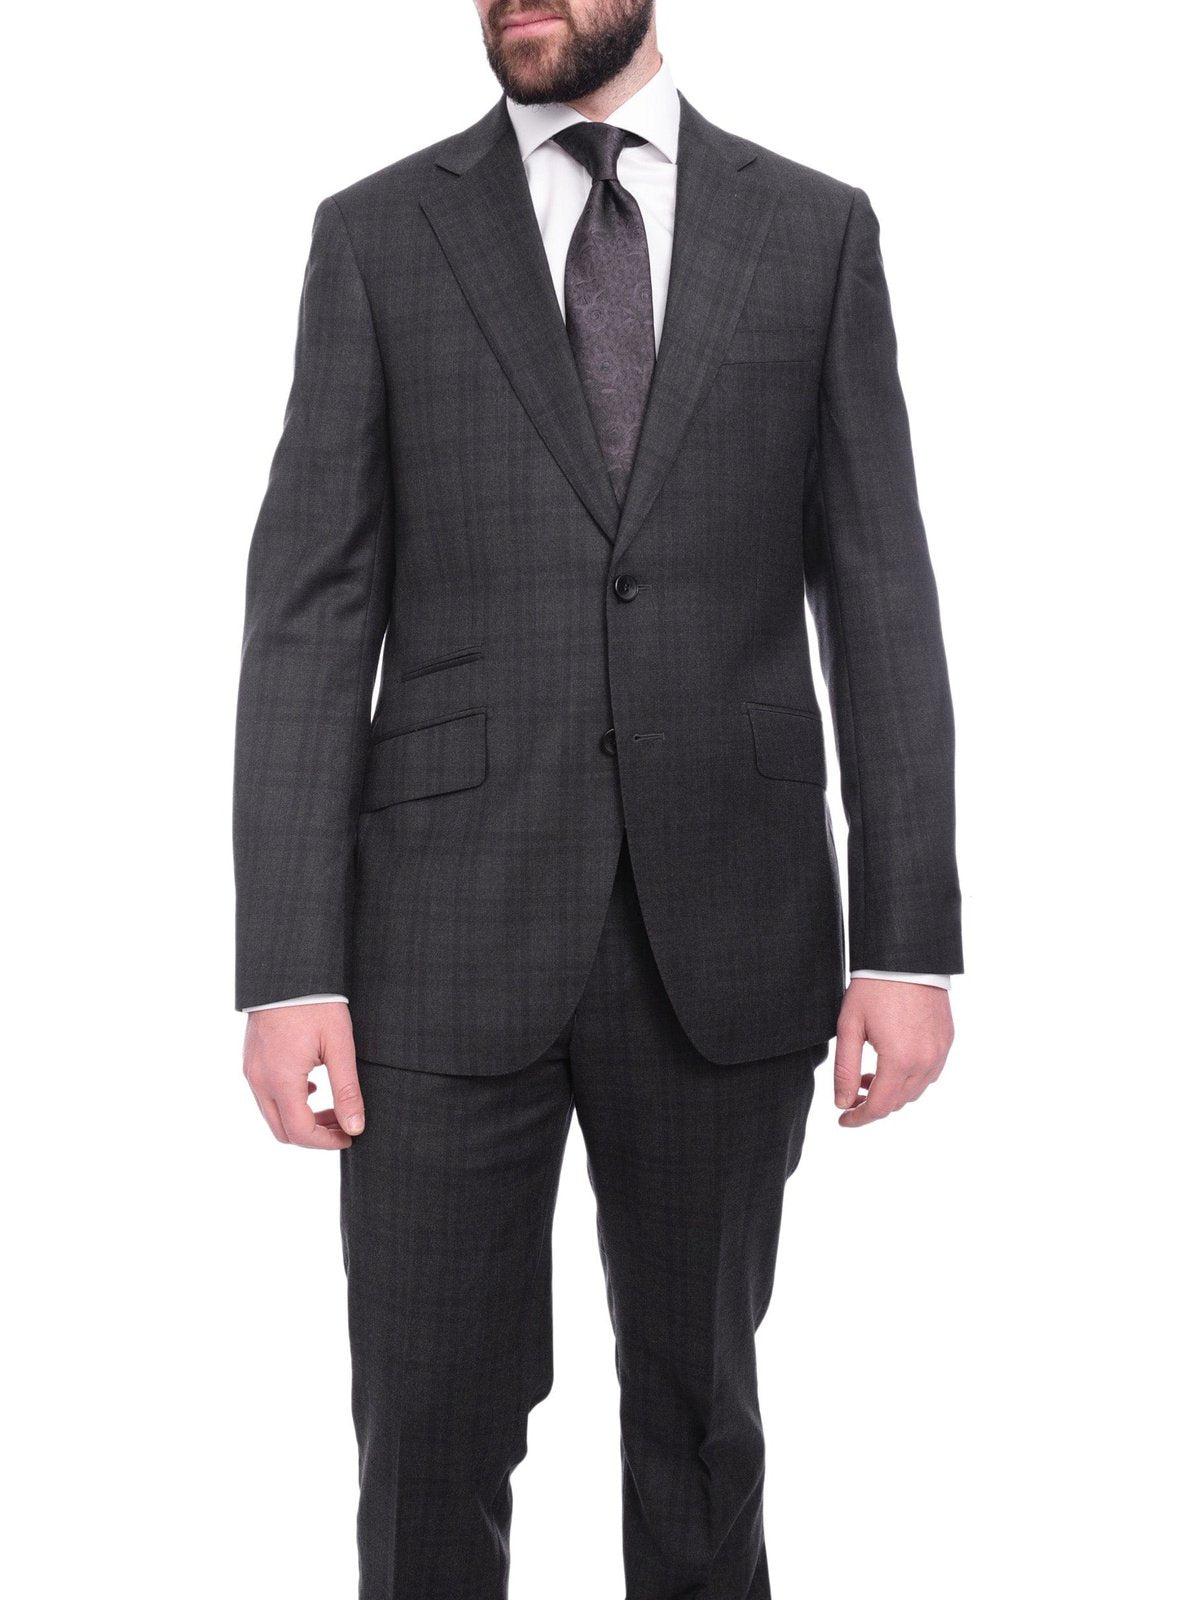 Napoli TWO PIECE SUITS Napoli Slim Fit Charcoal Gray & Purple Plaid Half Canvassed Super 150s Wool Suit